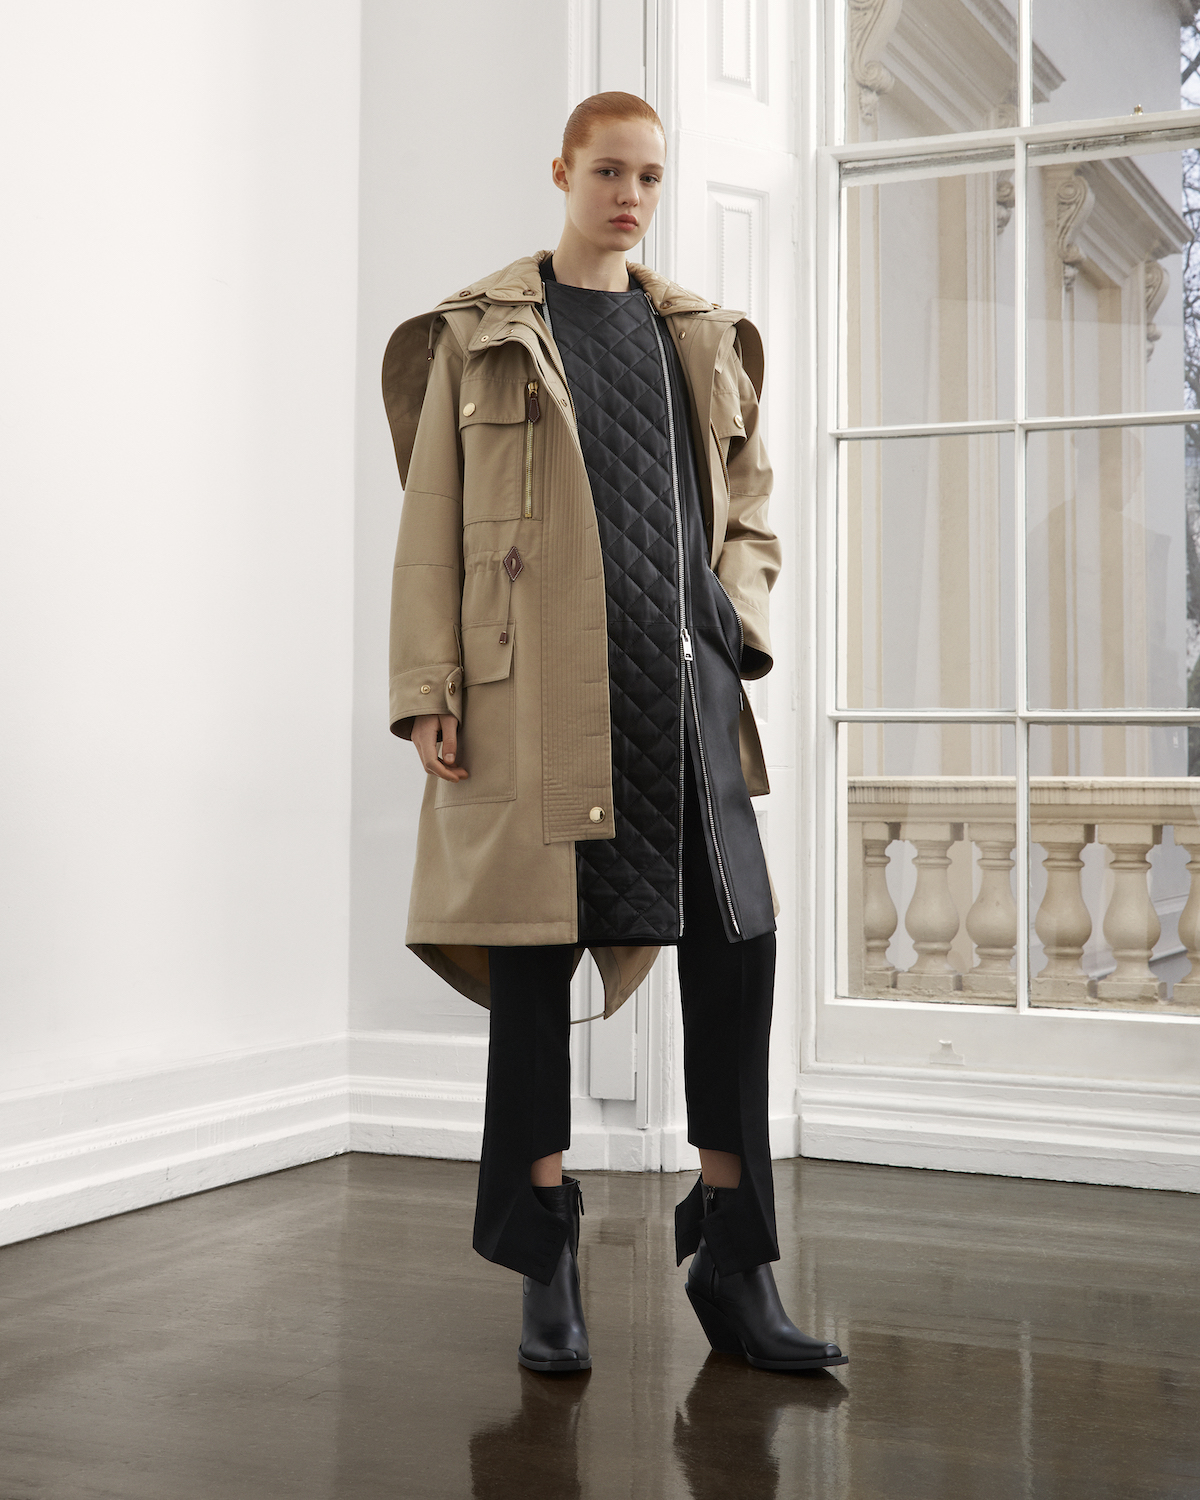 Burberry flies high thanks to bomber jackets and bumbags, Burberry group